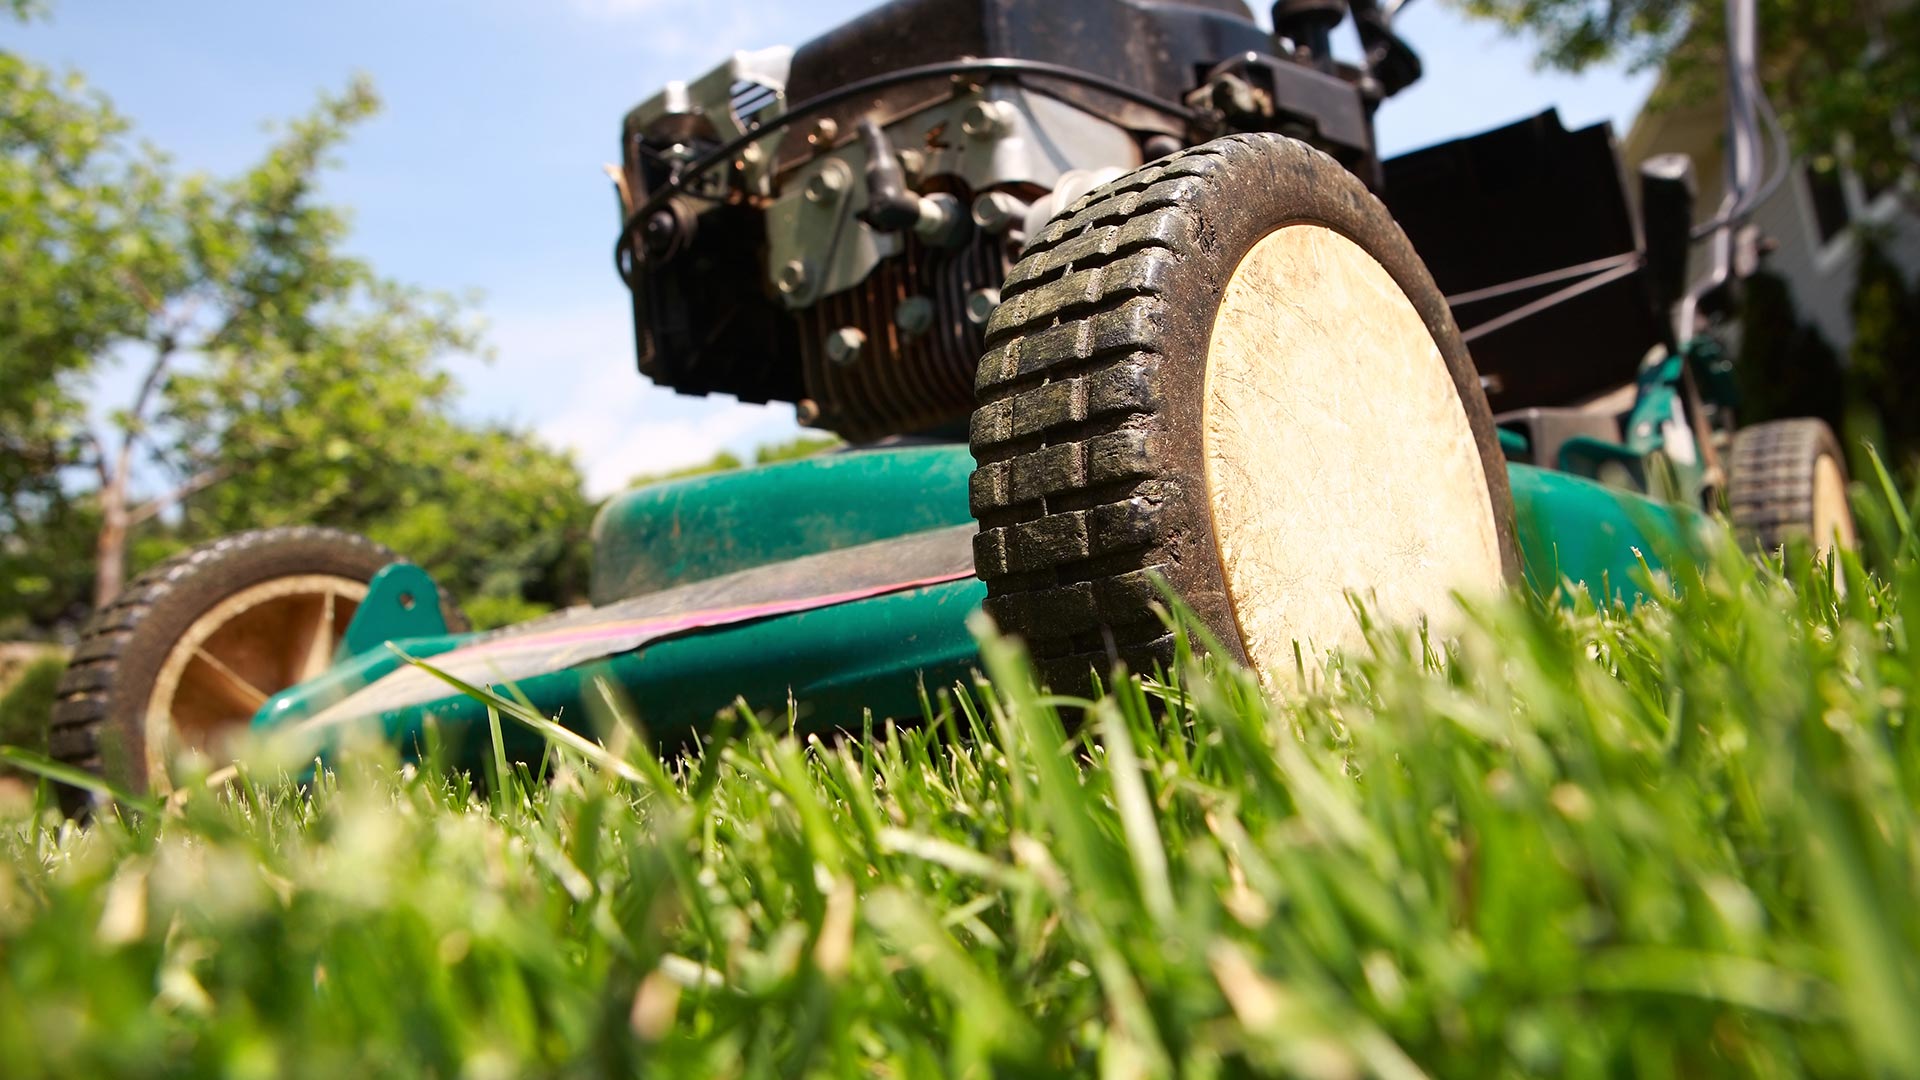 Follow These 3 Rules When Mowing Your Sod for the First Time